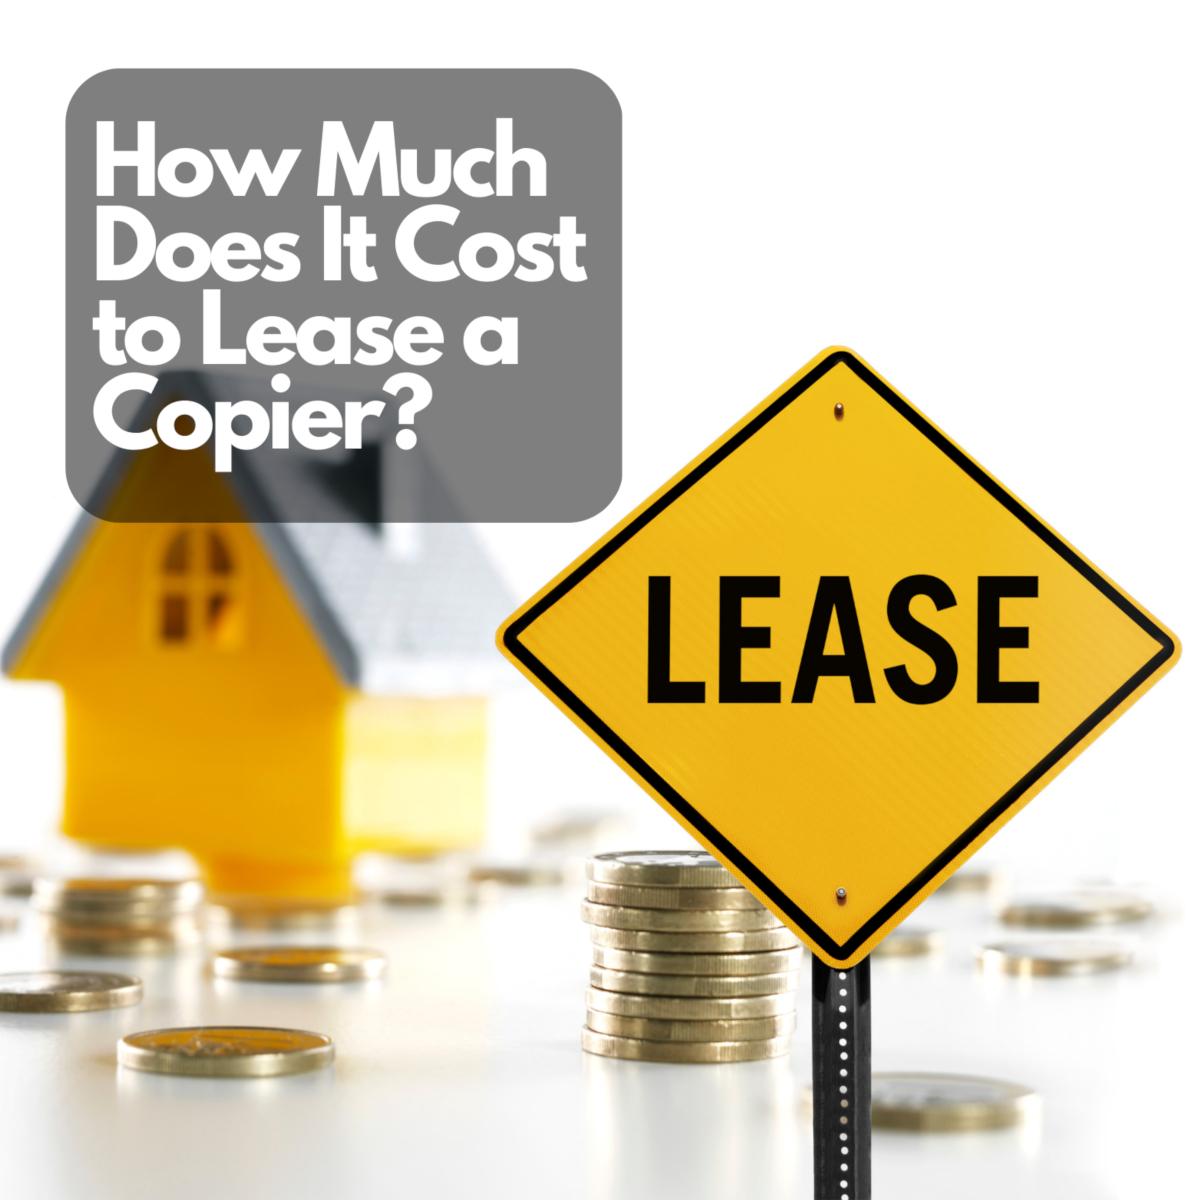 The text 'How Much Does it Cost to Lease a Copier' over a small plastic house in the background and a sign that says Lease in the foreground.